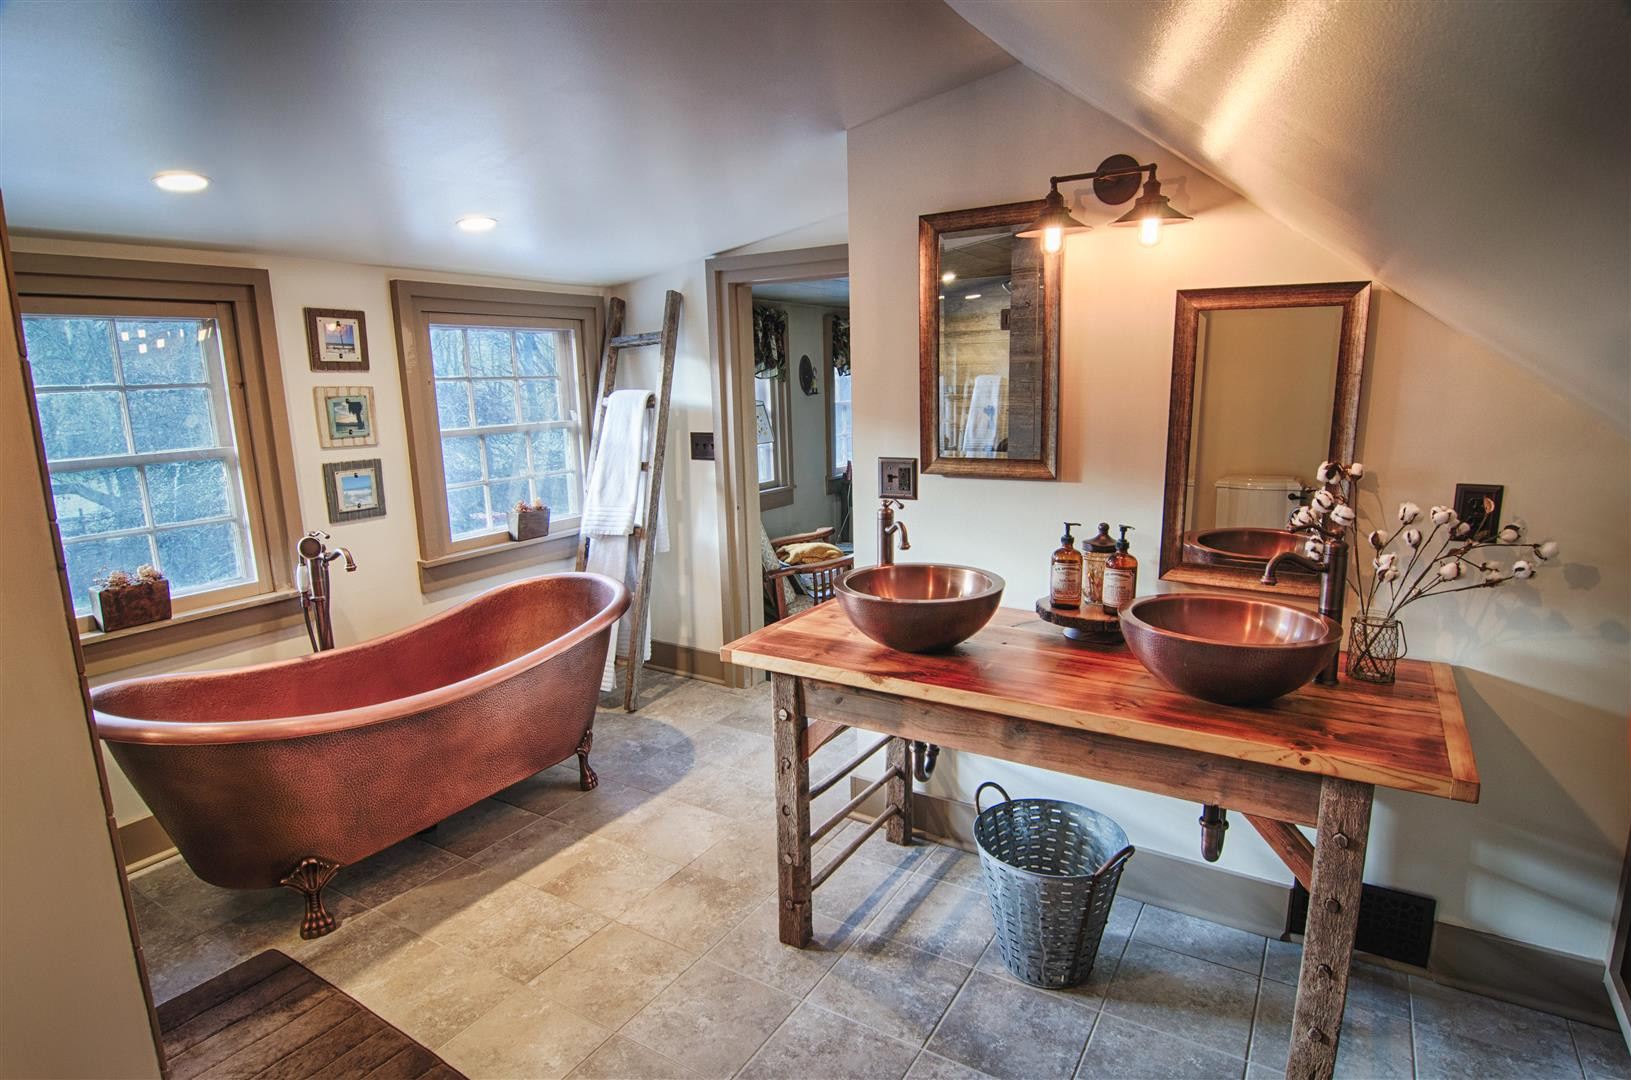 Copper claw-foot tub, and copper fixtures